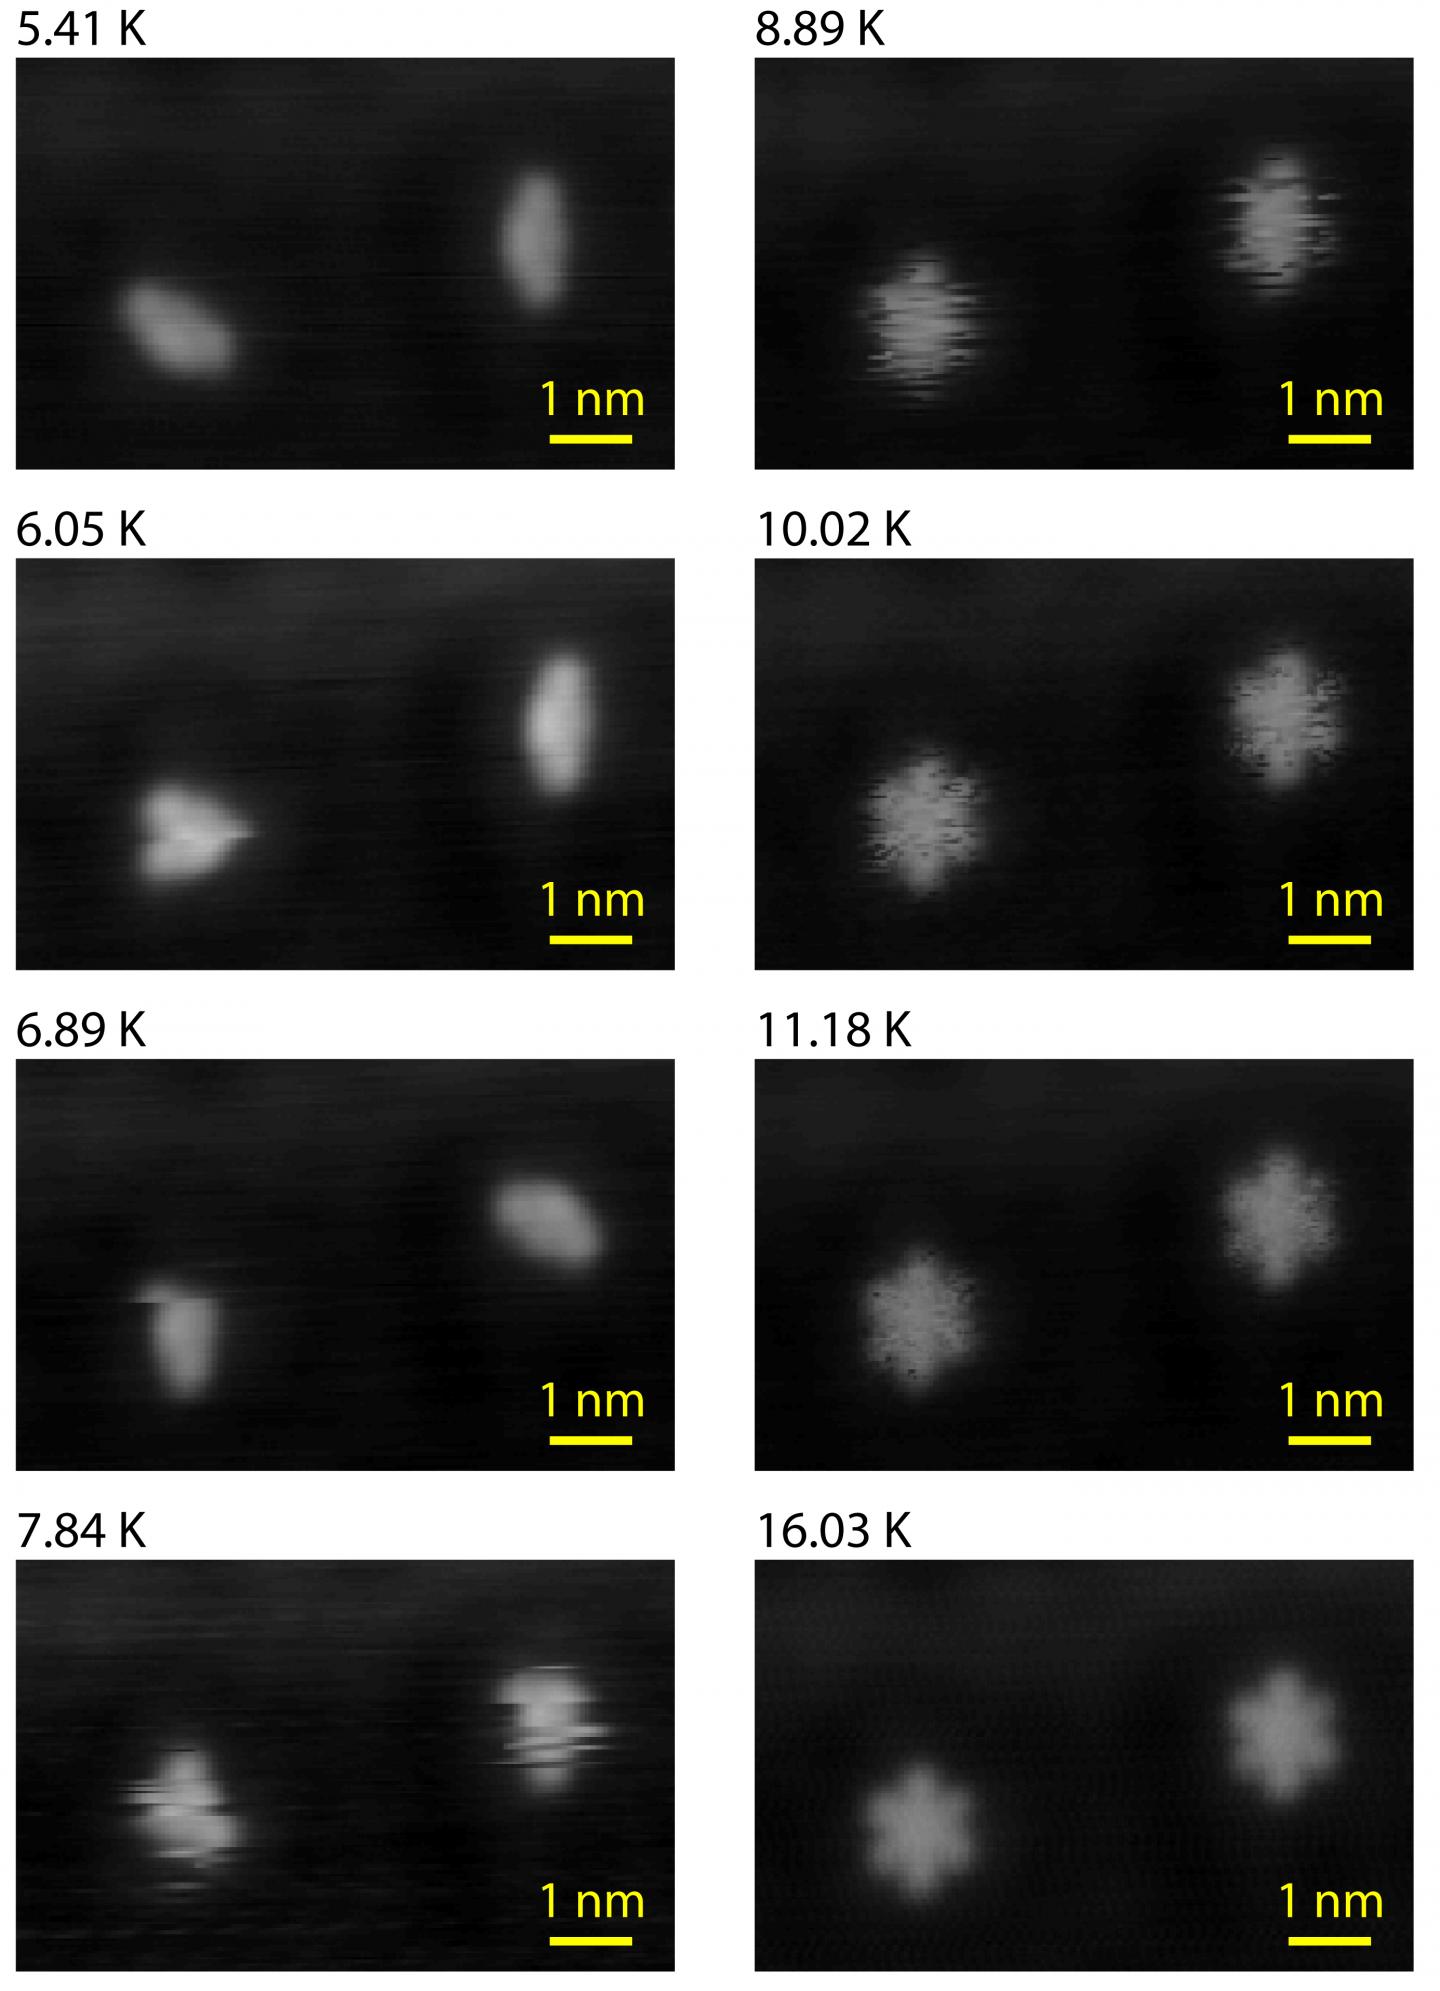 Measuring Entropy: Scanning-Tunneling Microscope Gives Glimpse of the Mysterious Property